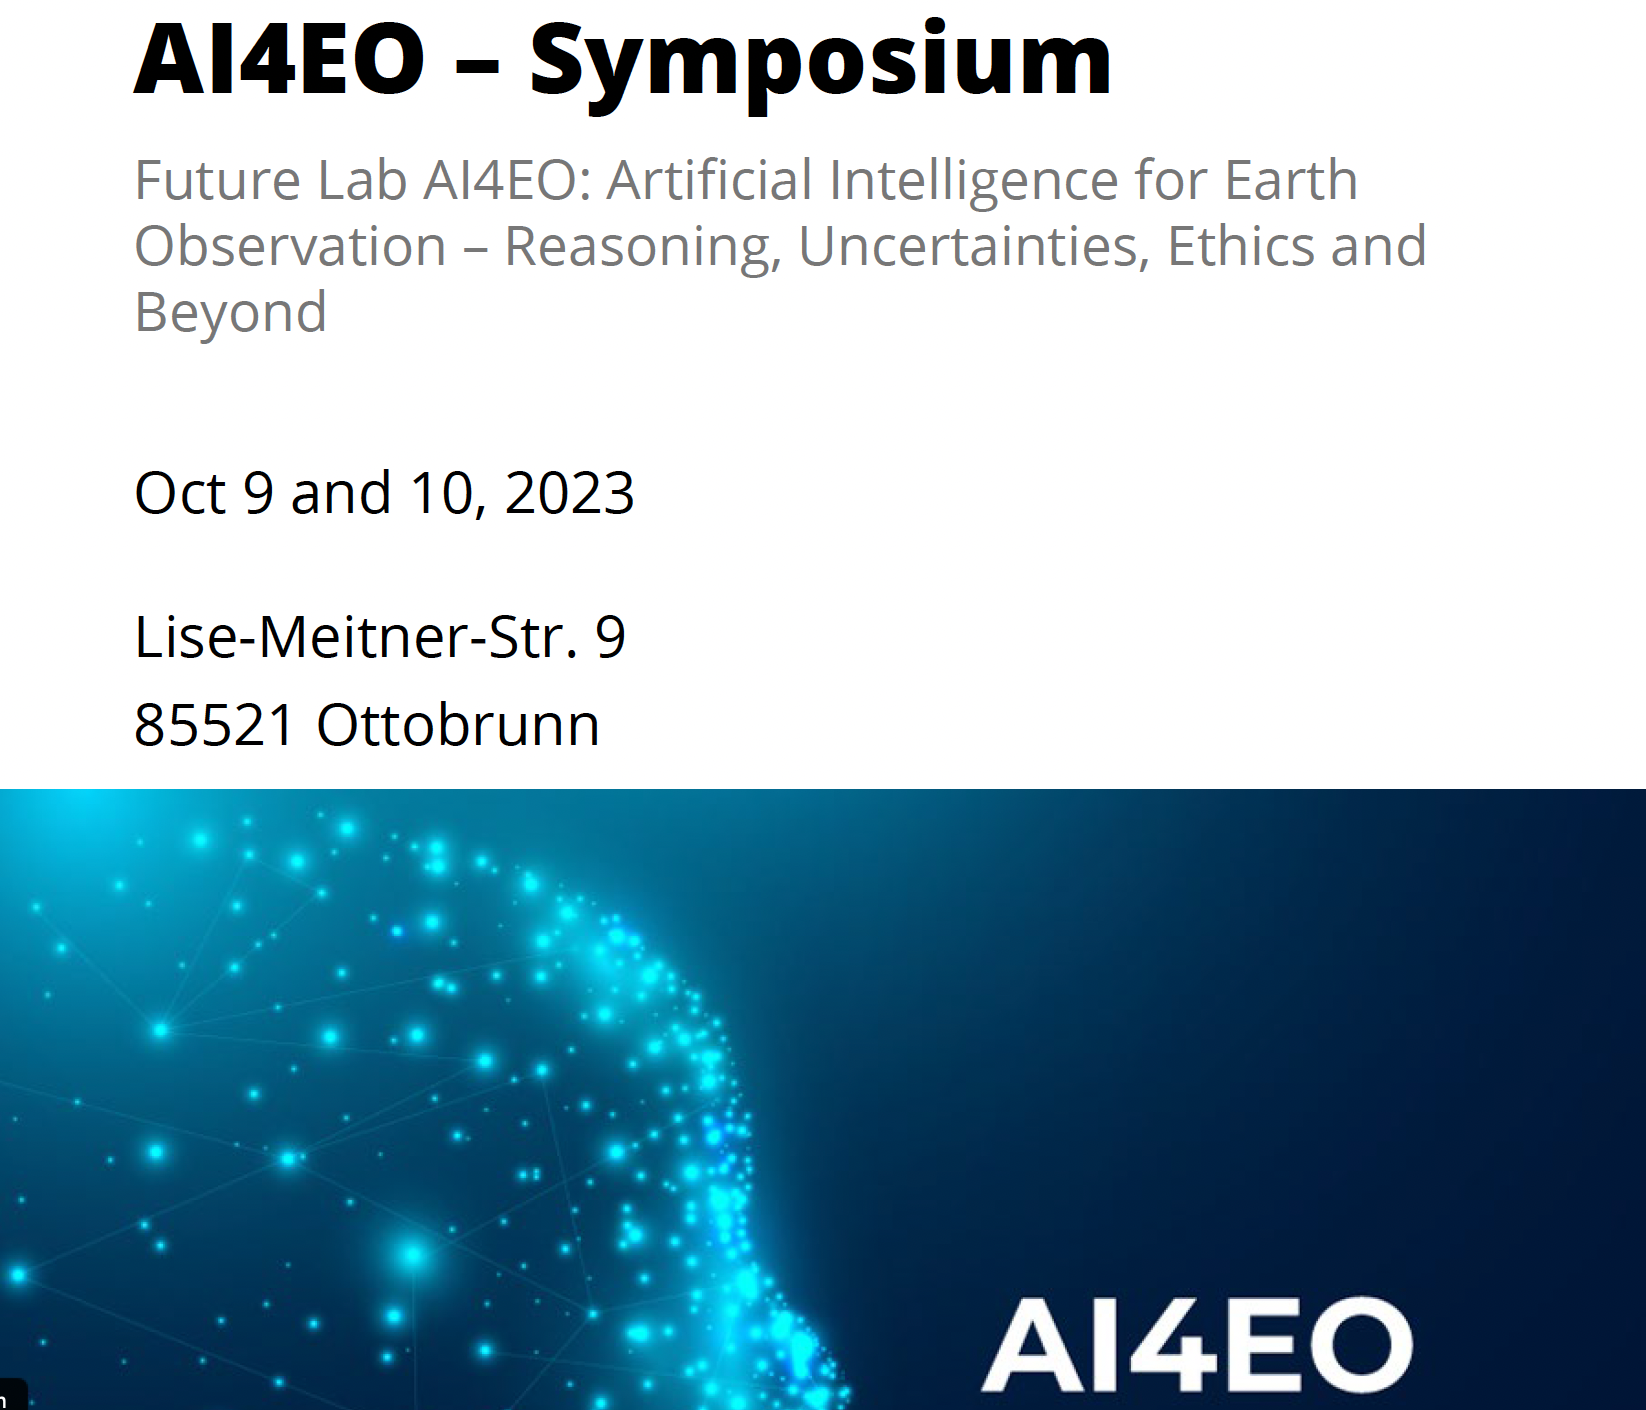 Registration to AI4EO Symposium 2023 is open